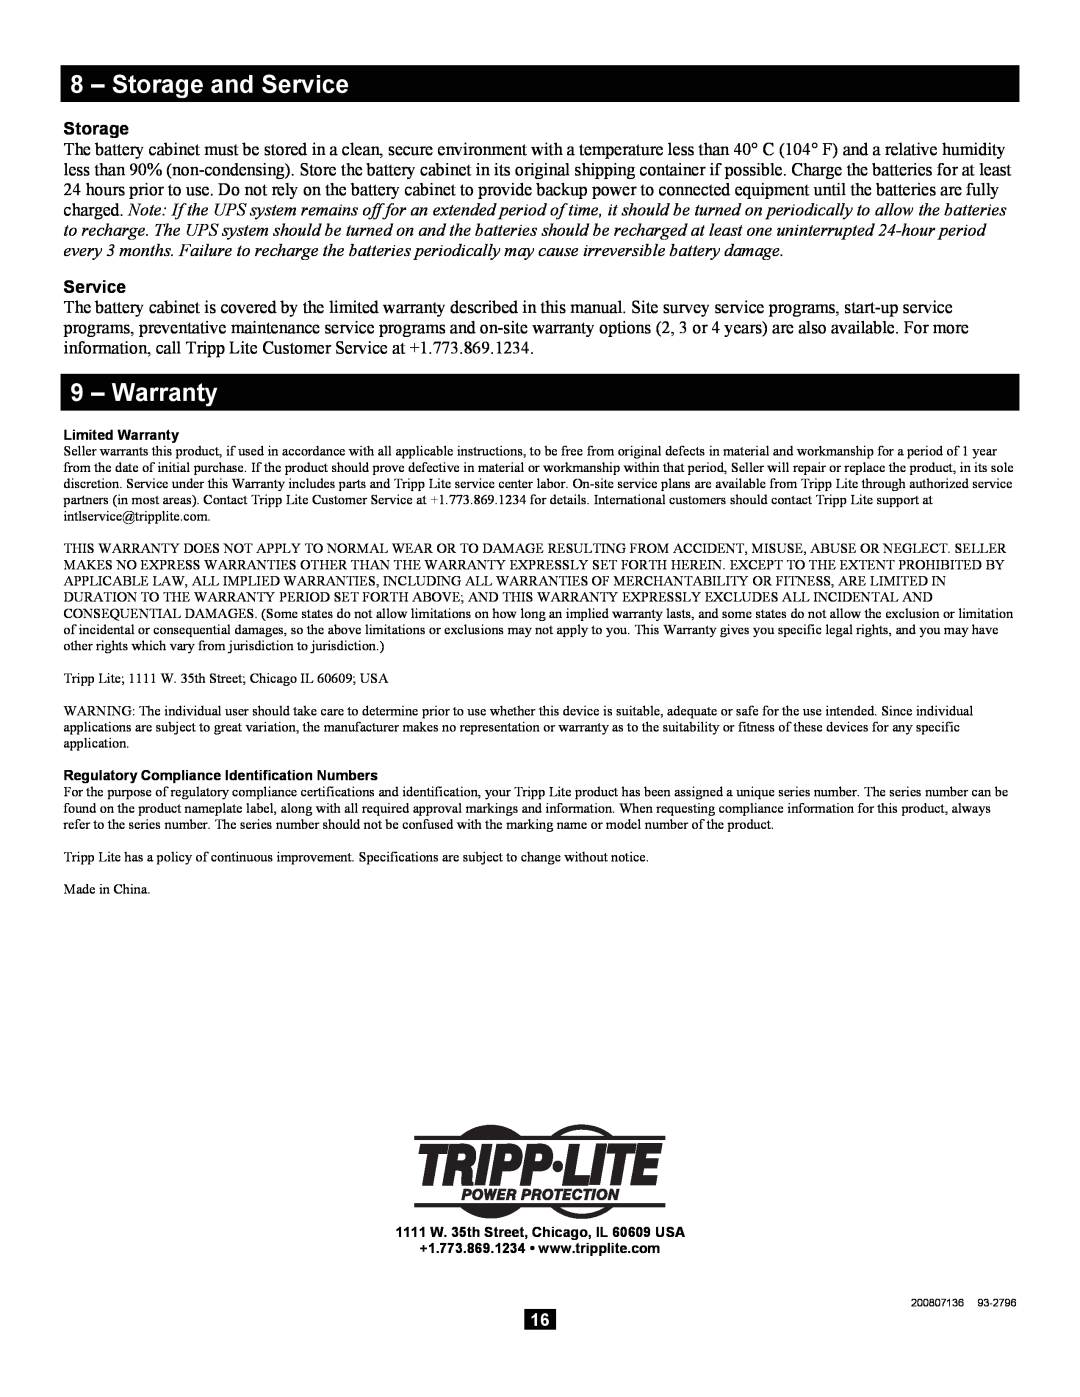 Tripp Lite Extended-Run 3-Phase Battery Cabinet owner manual Storage and Service, Warranty 